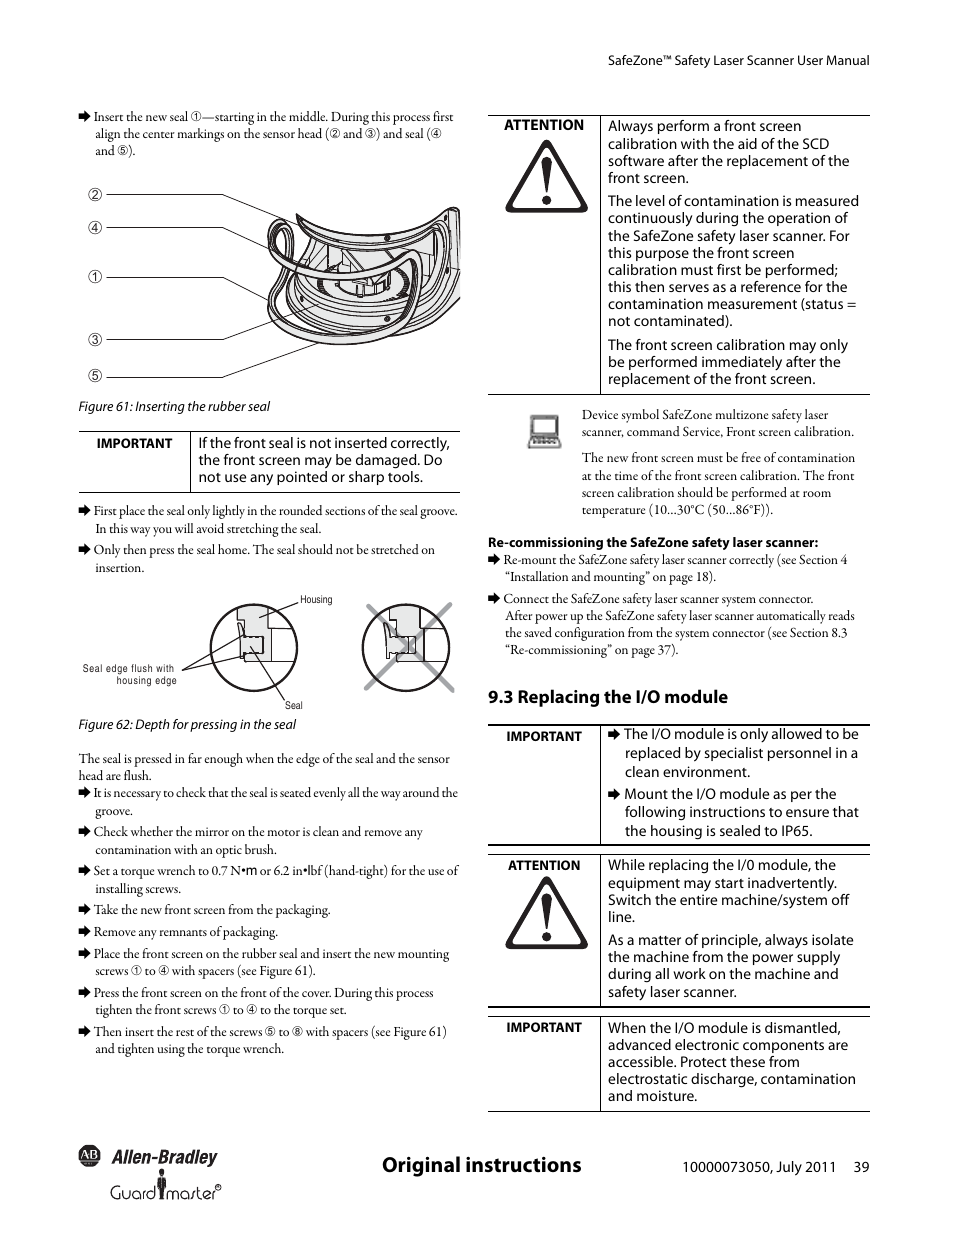 Original instructions, 3 replacing the i/o module | Rockwell Automation 442L SafeZone Singlezone & Multizone Safety Laser Scanner User Manual | Page 41 / 60